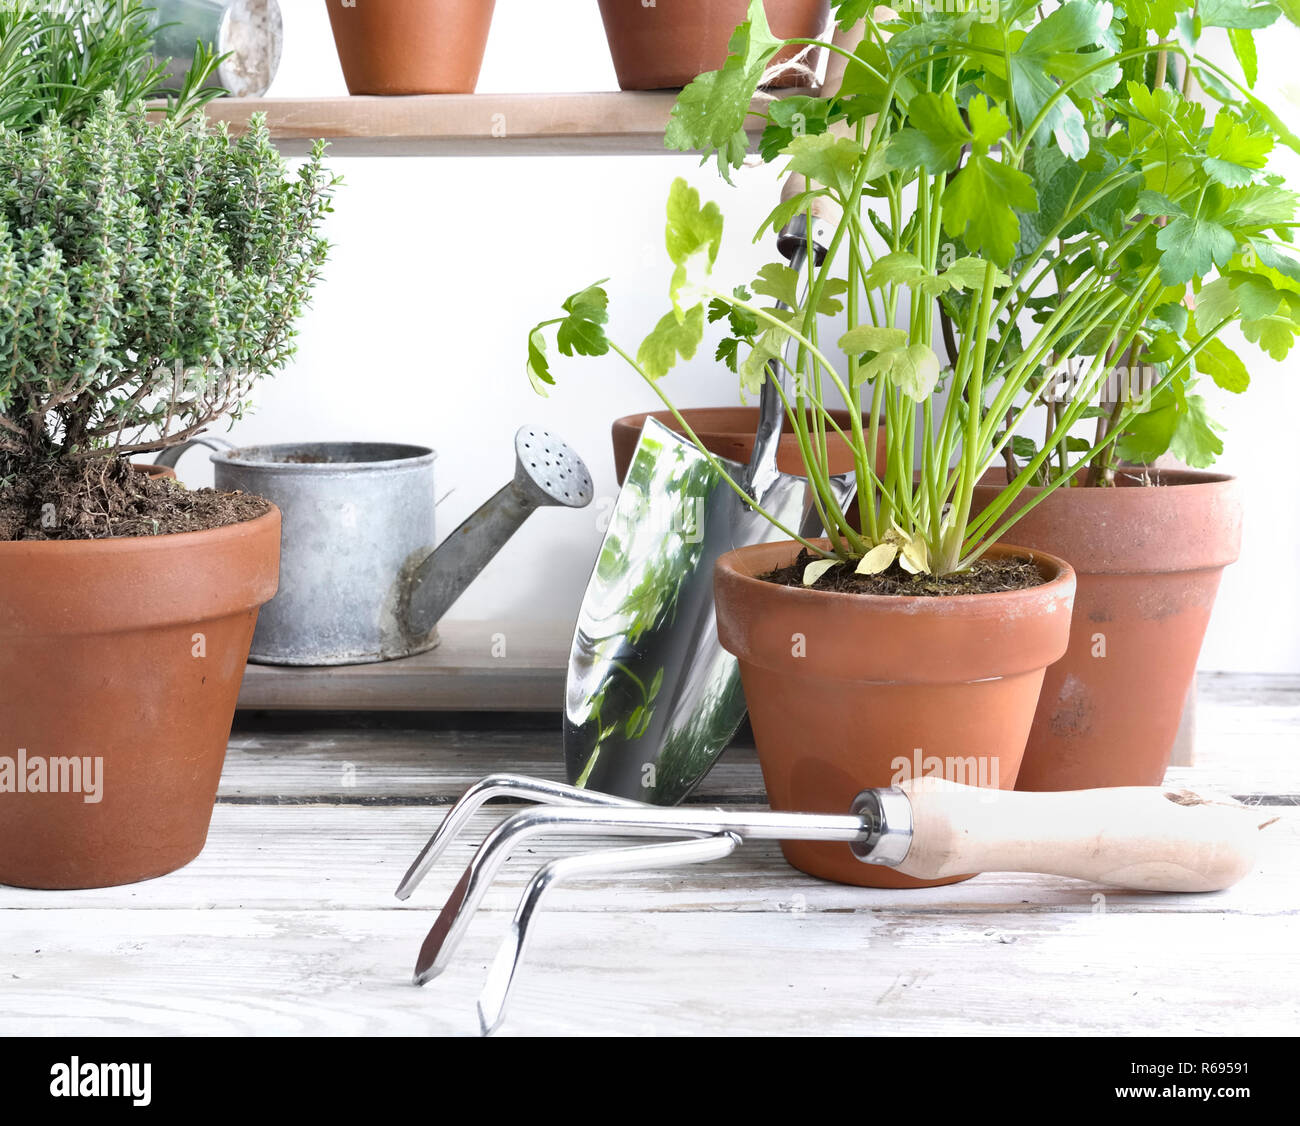 aromatic plants potted and gardening equipment Stock Photo